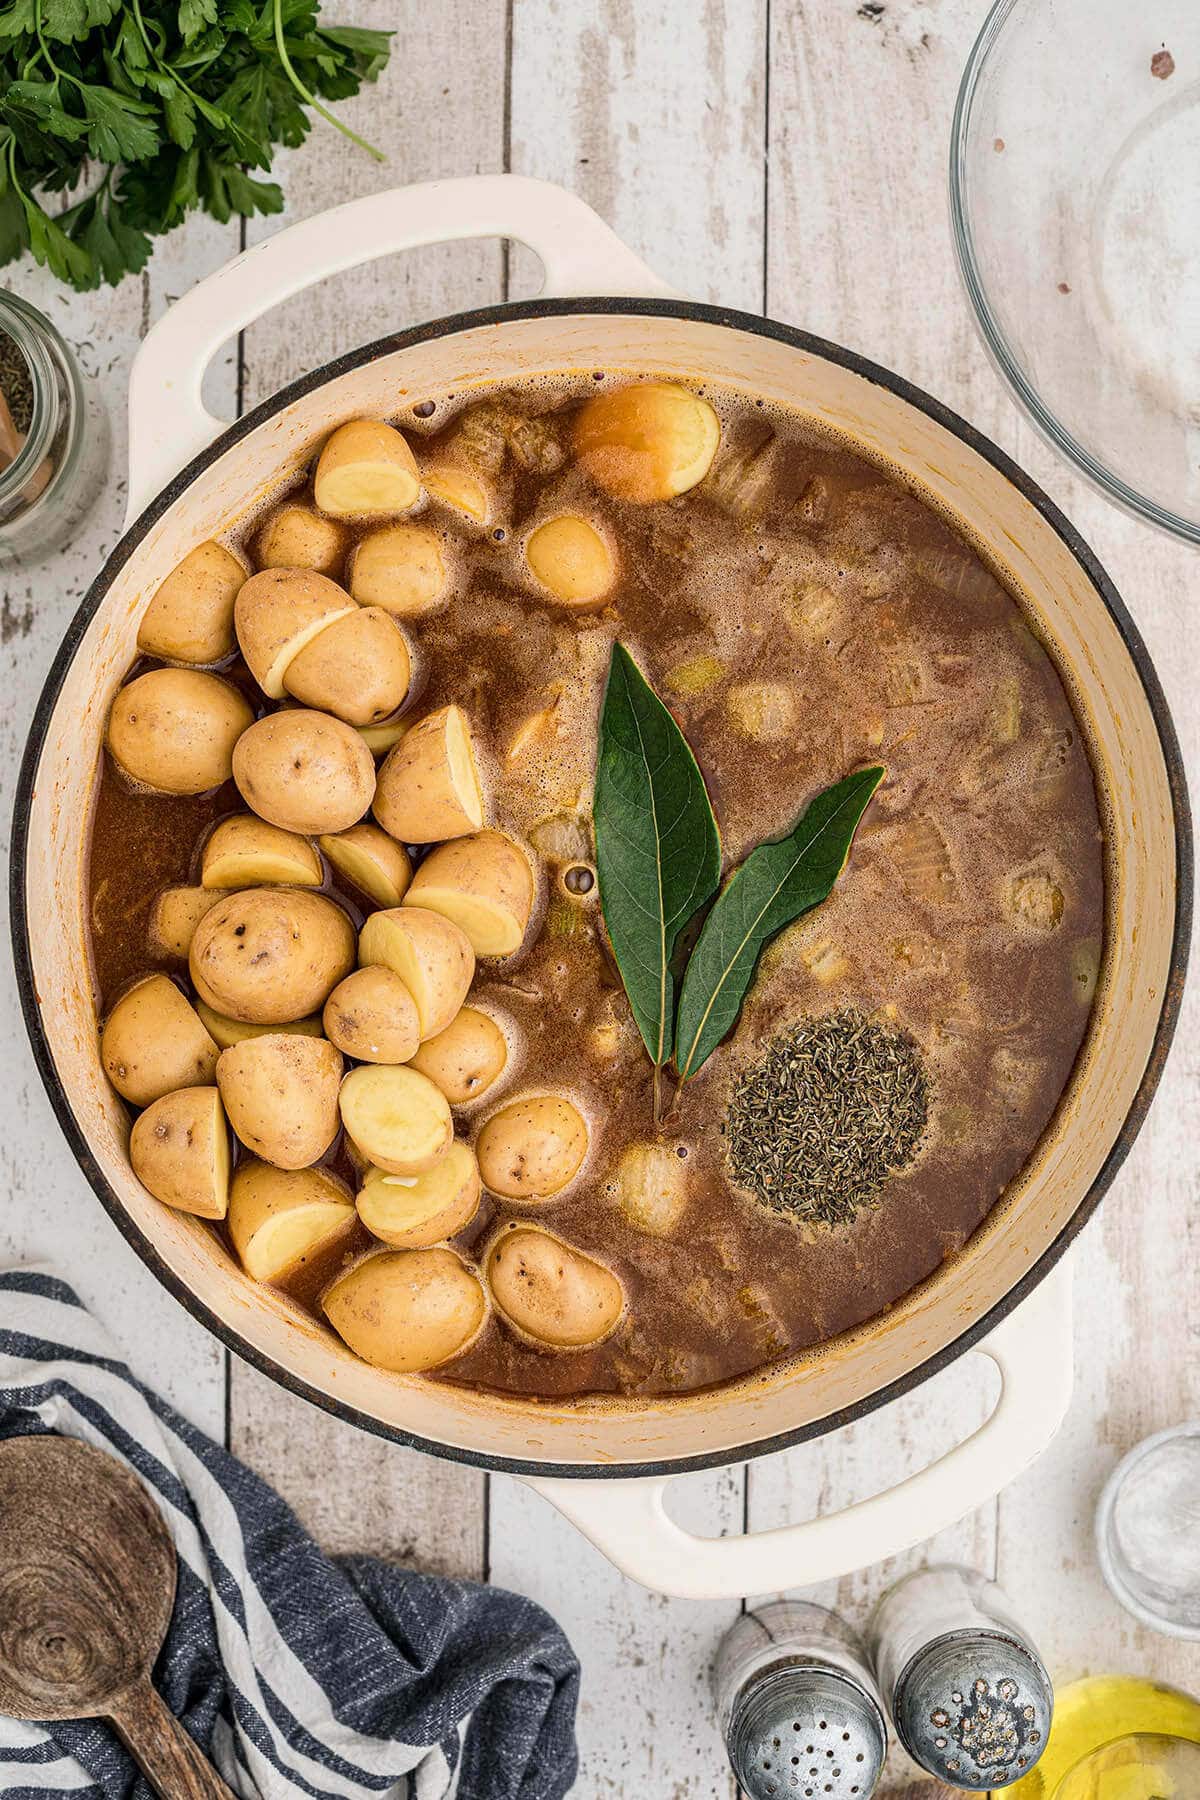 Stockpot filled with stew and vegetables. Potatoes were just added along with two bay leaves. 